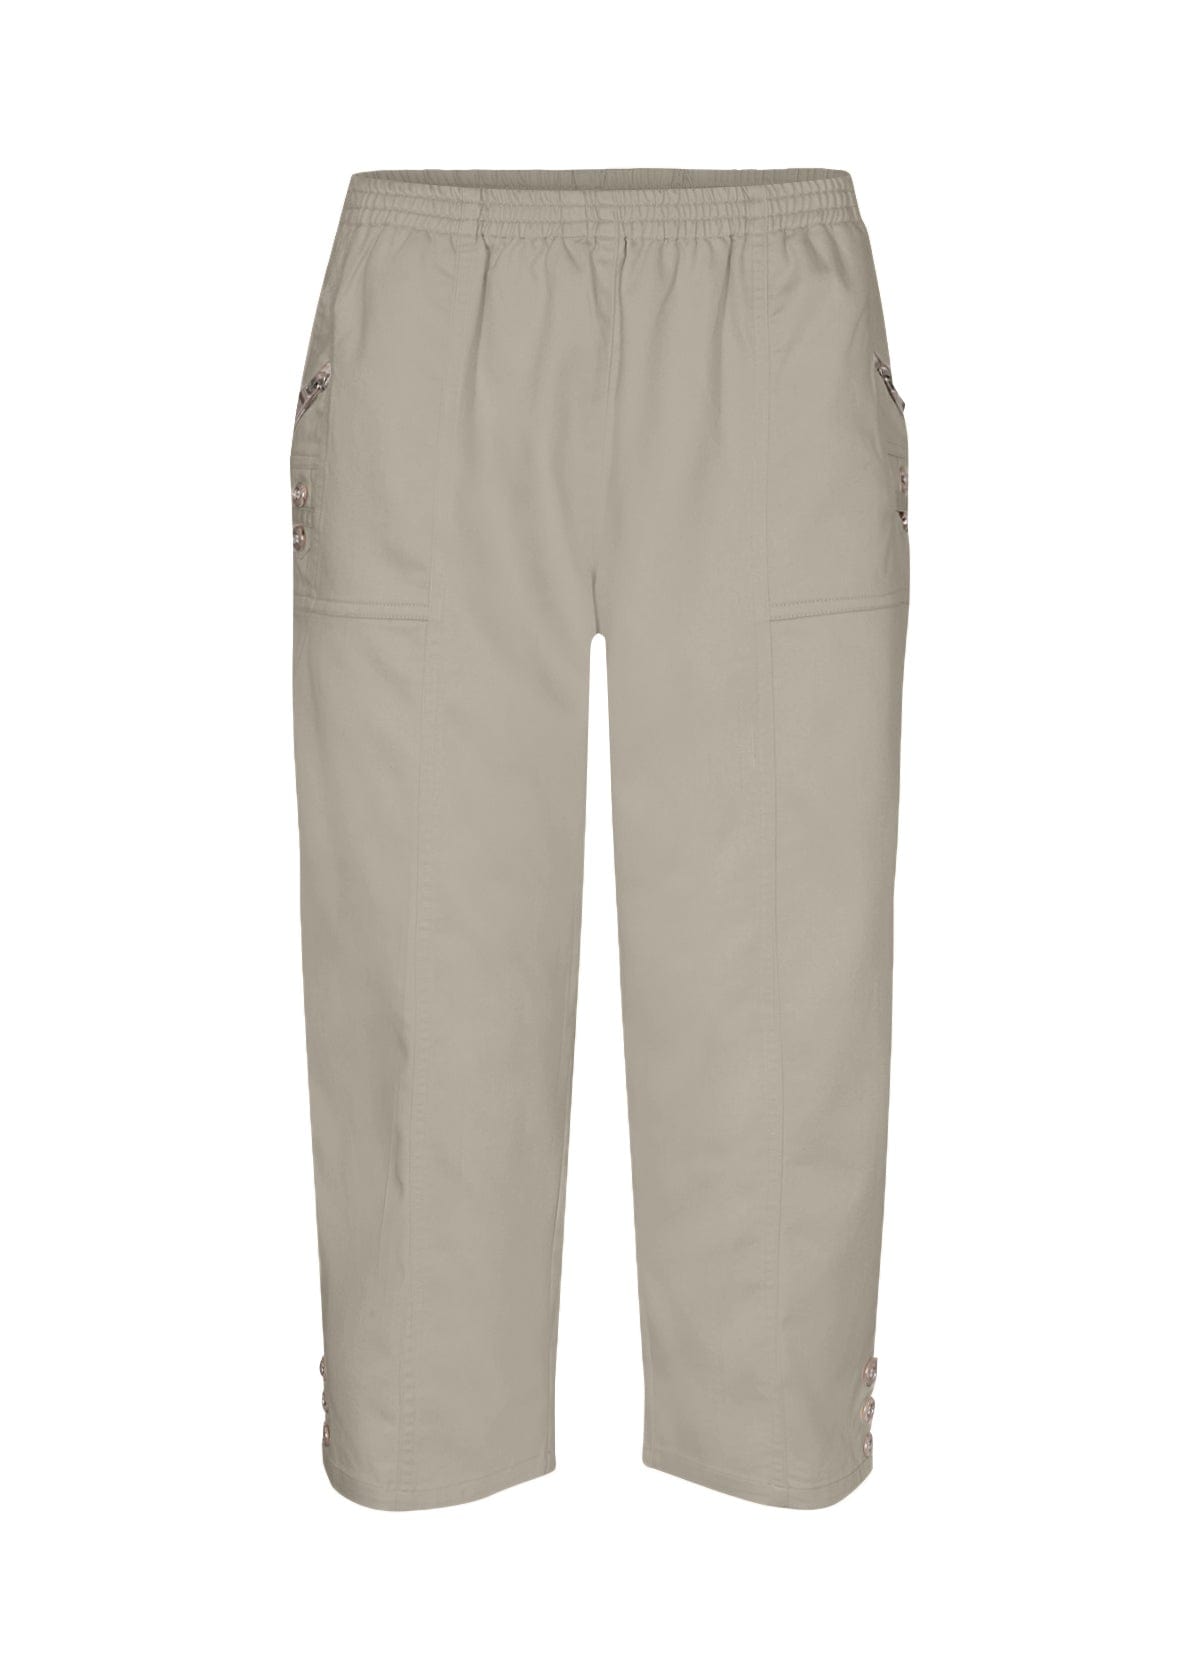 Soyaconcept Three Button Crop Trouser